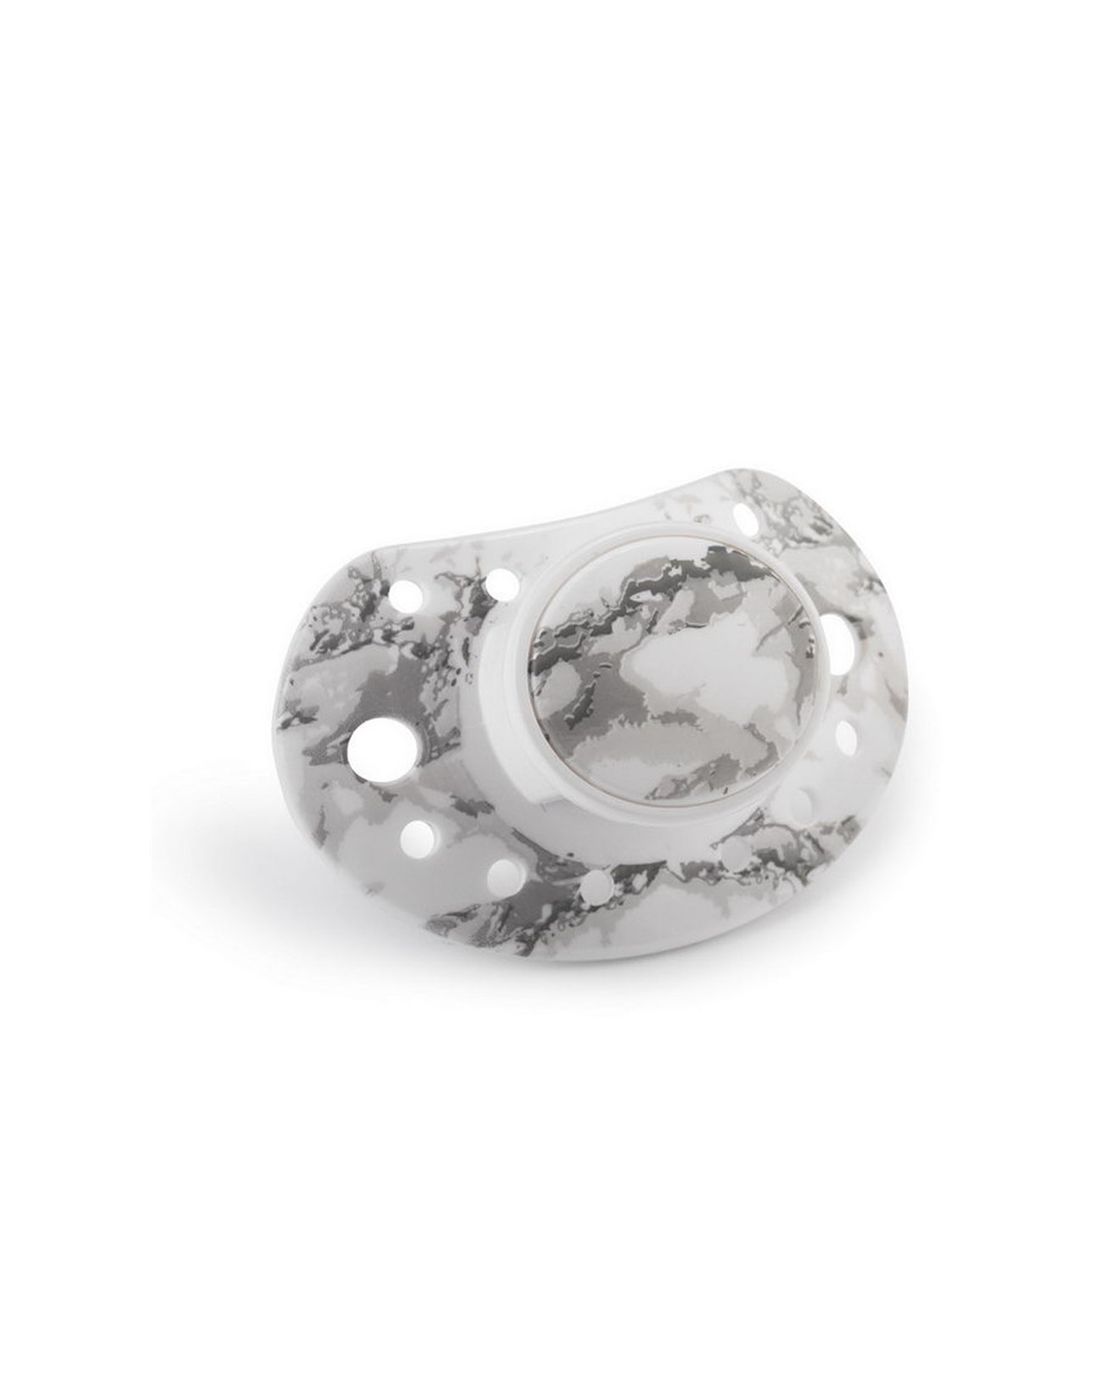 Elodie Details Baby Pacifier Marble Grey 3+ months